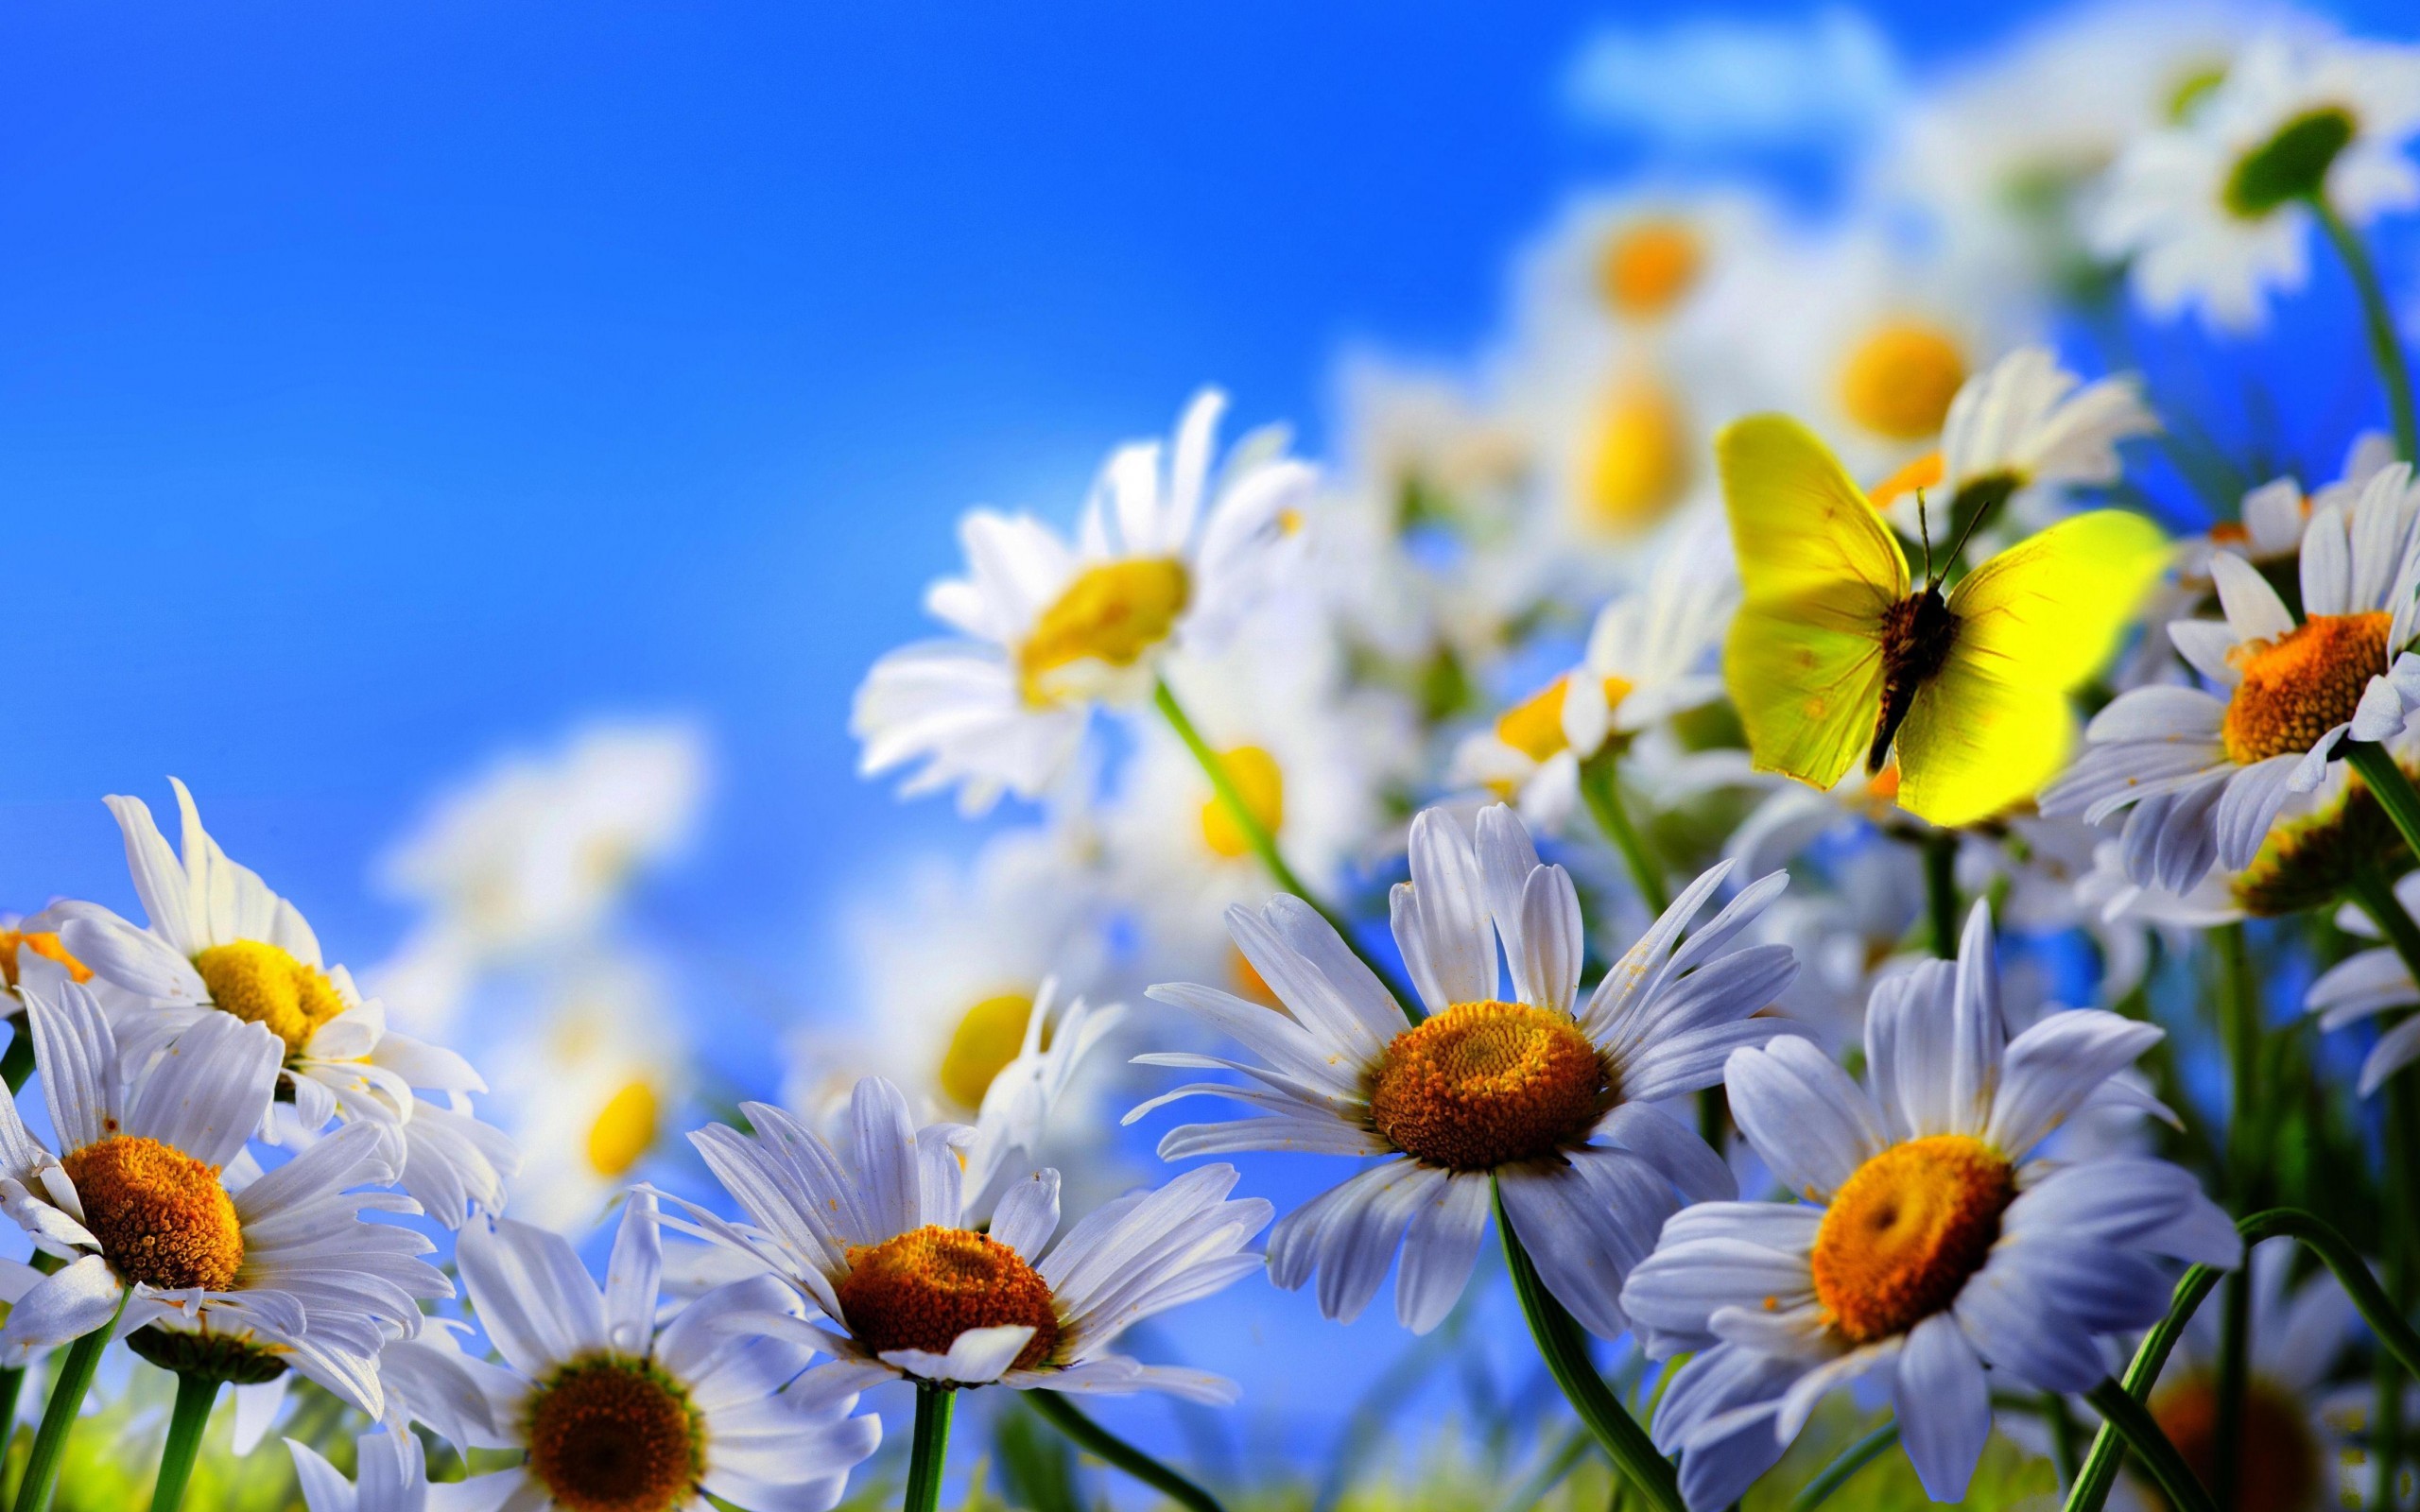 insects, blue, plants, butterflies, flowers, camomile